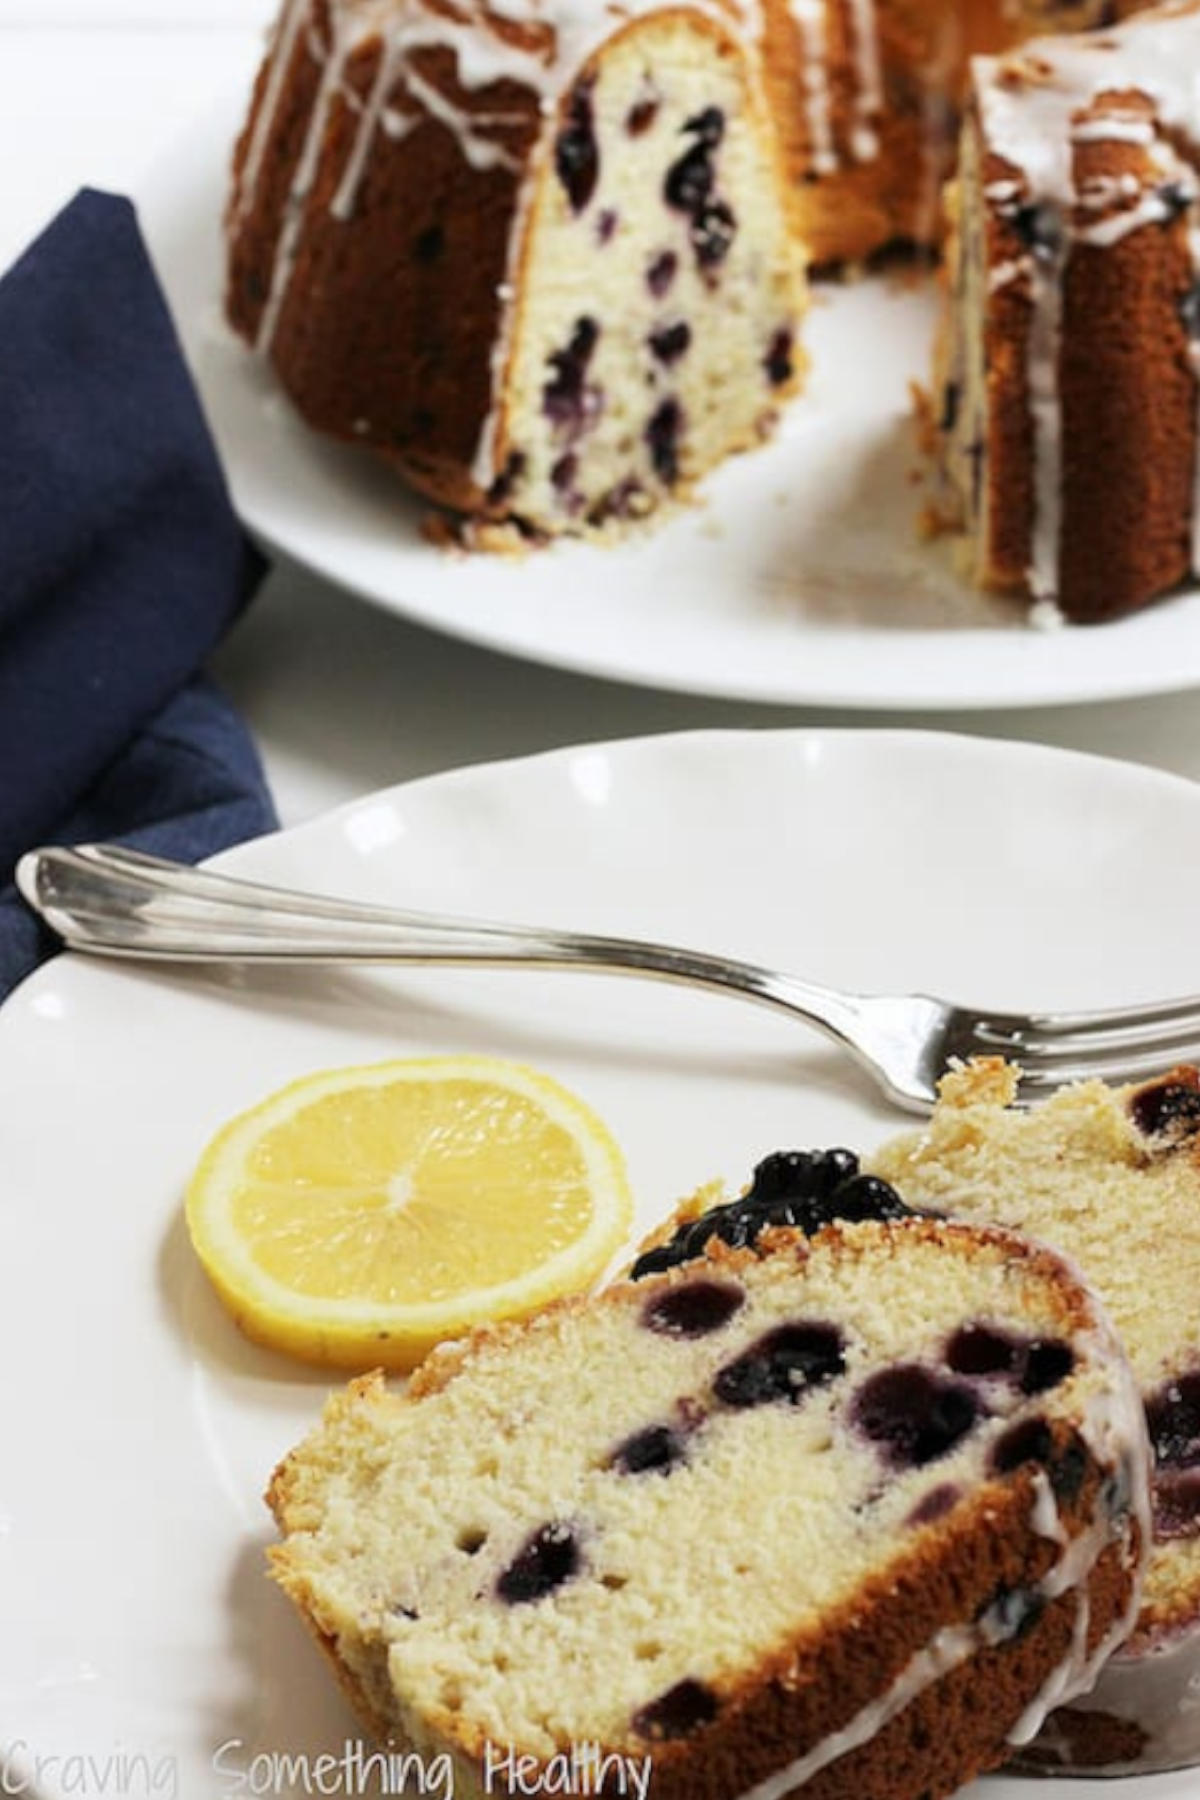 Slices of blueberry lemon pound cake on a plate with a slice of lemon and a fork.